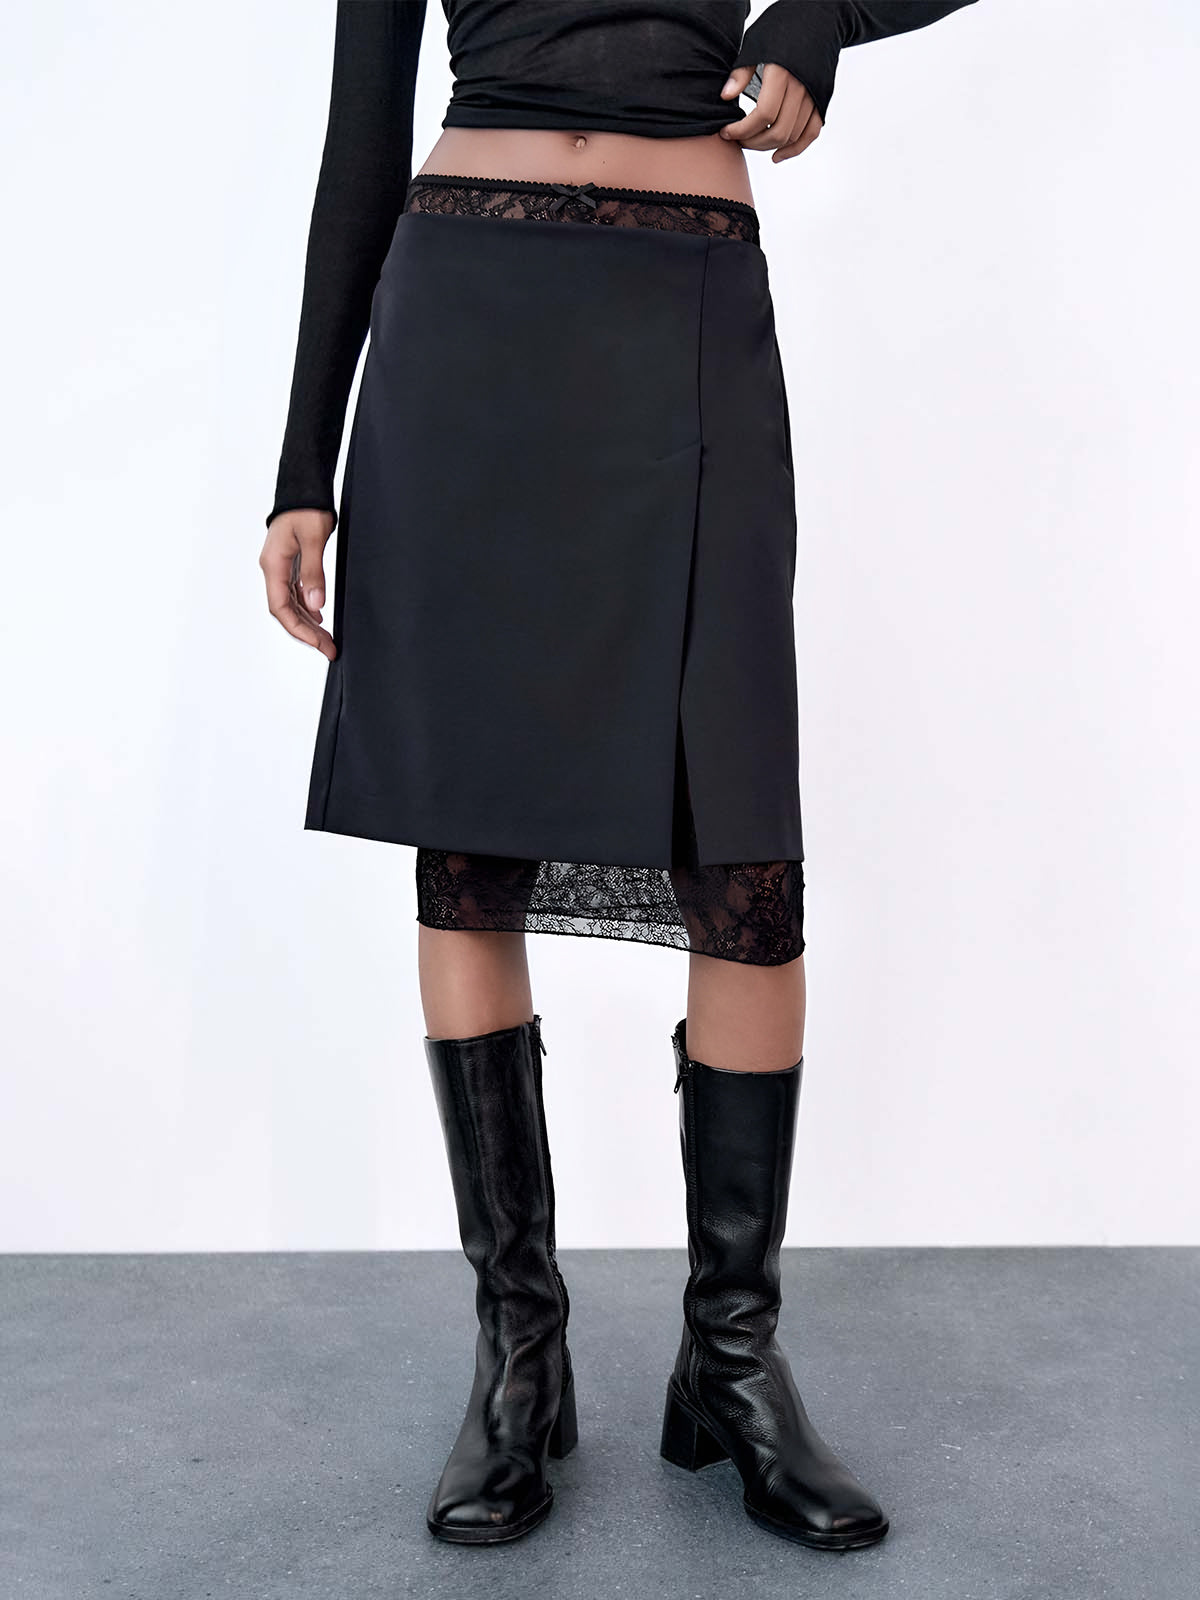 Lace Trimmed Pencil Skirt